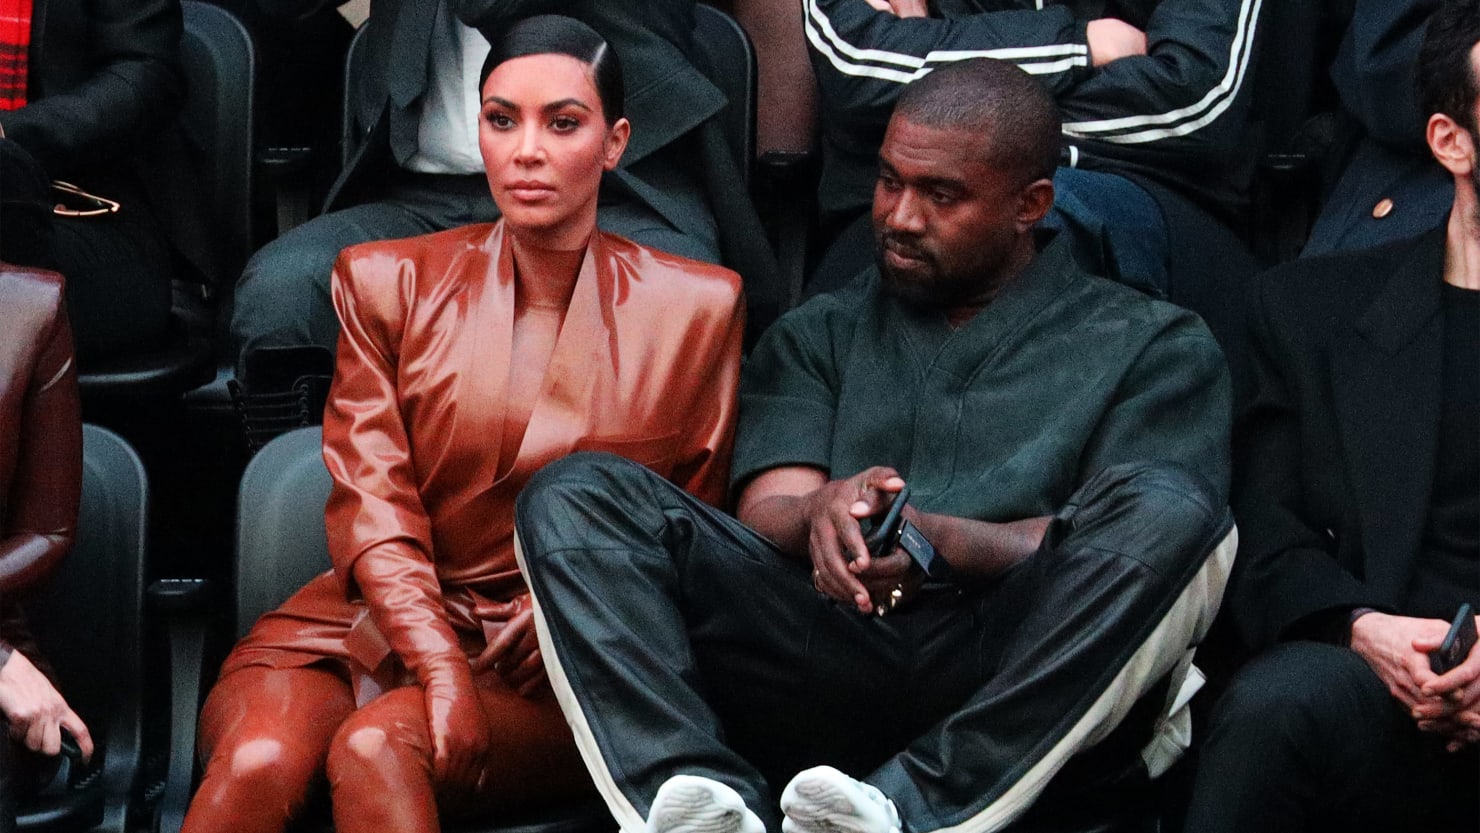 The curious timing of Kim Kardashian’s divorce from Kanye West